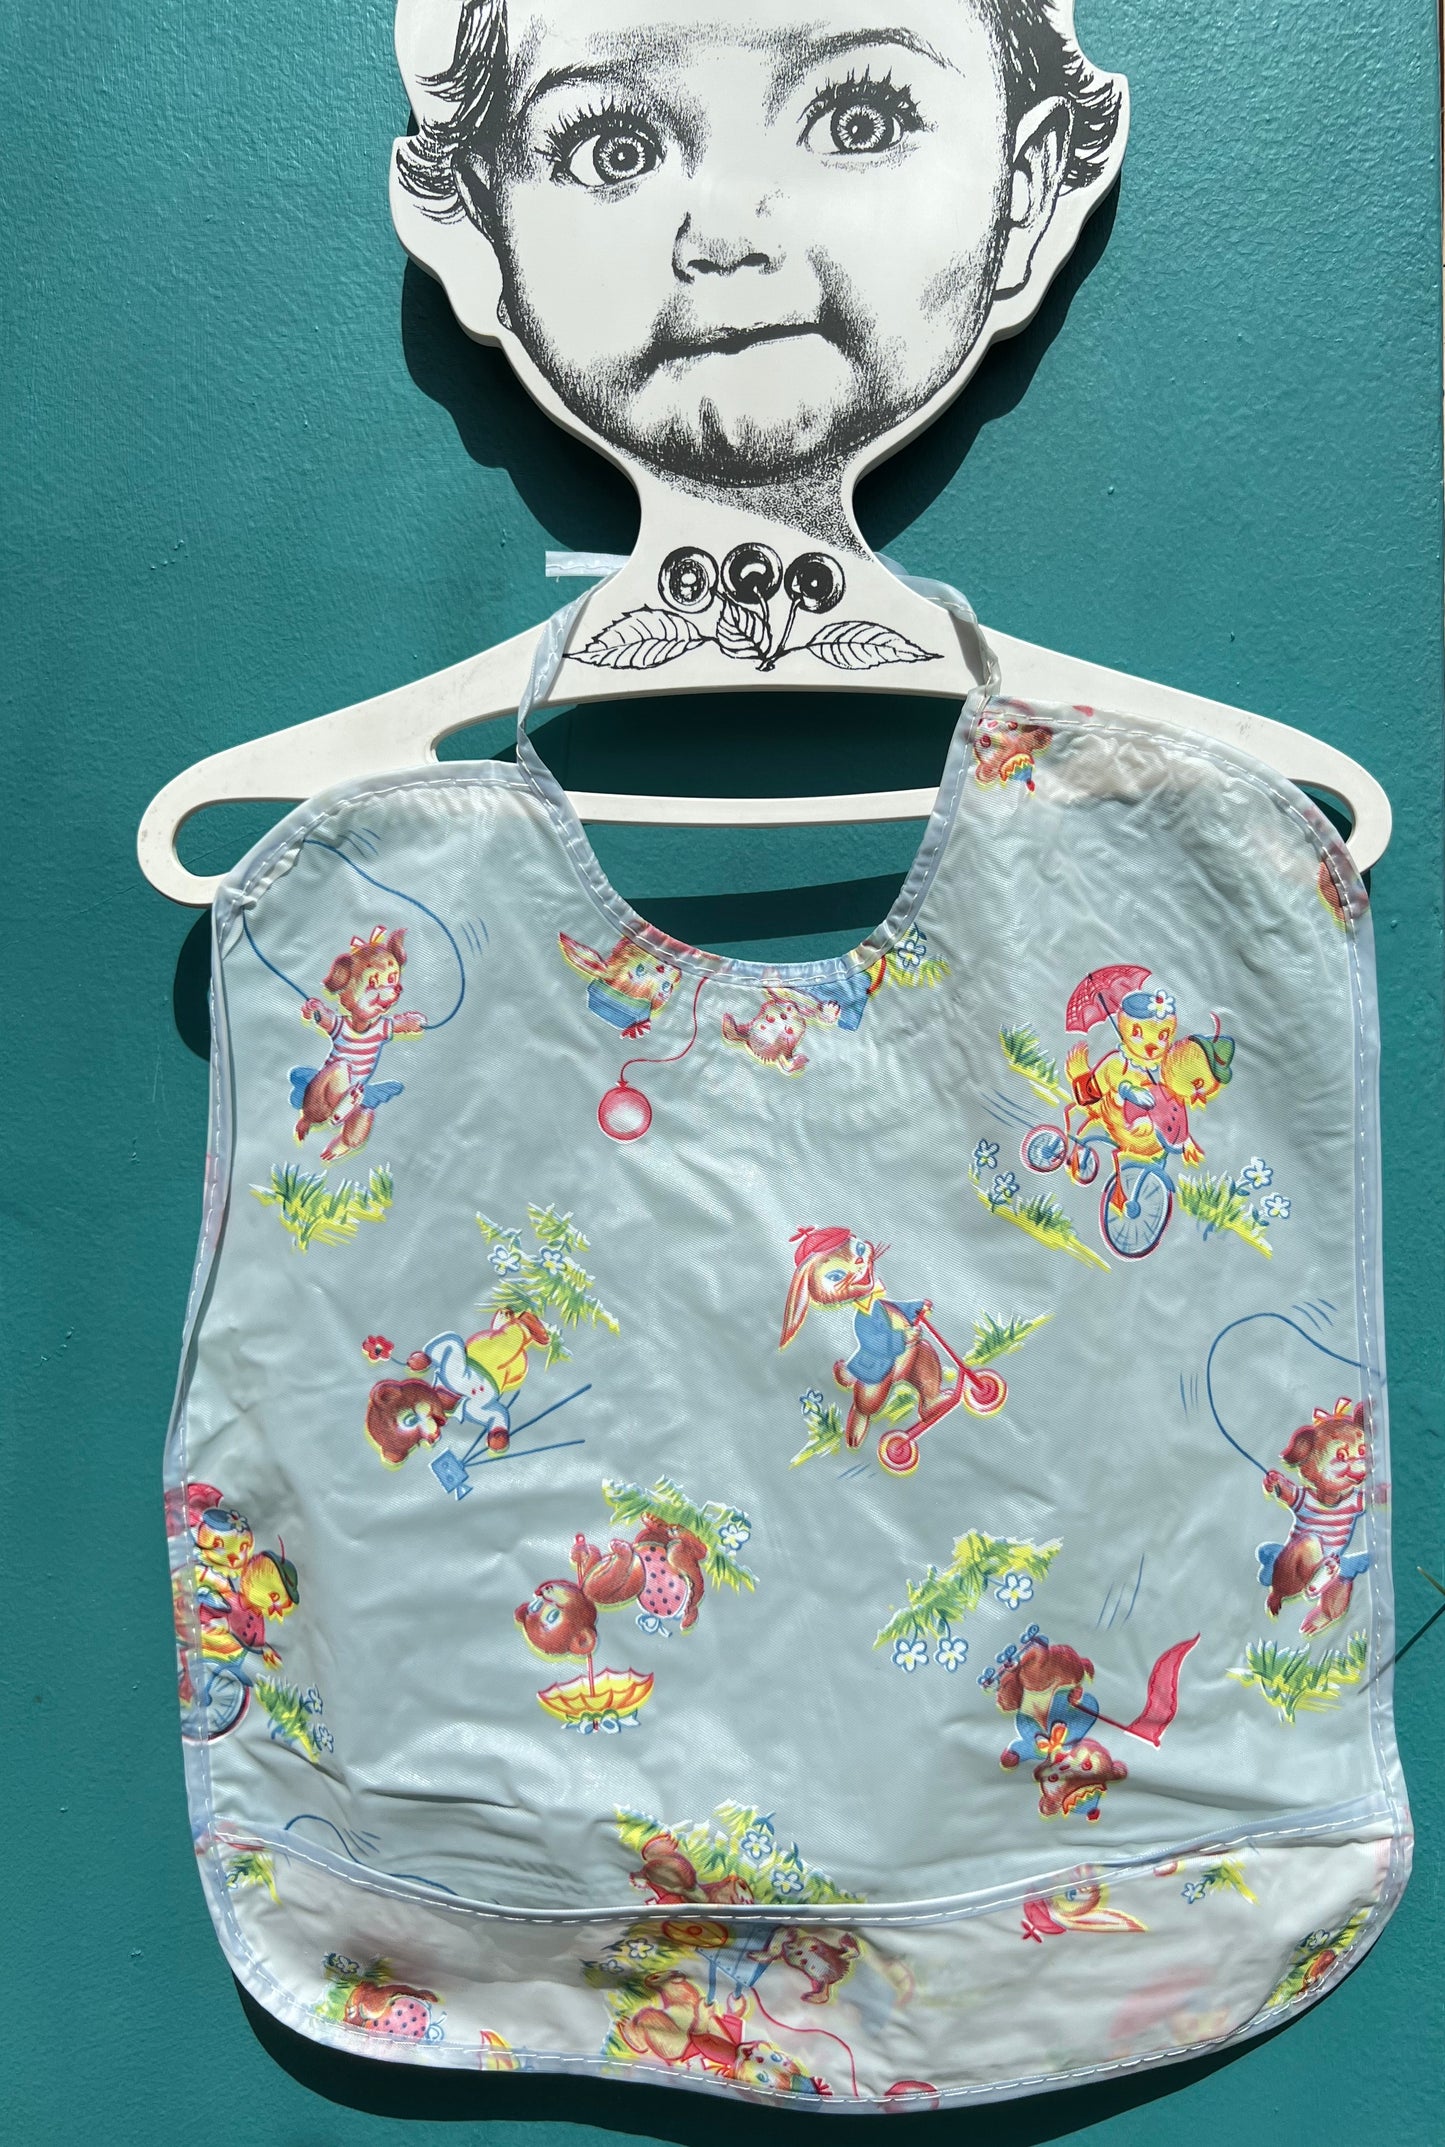 Delightful 1950s Bibs Decorated with Cute Anthropomorphic Animals